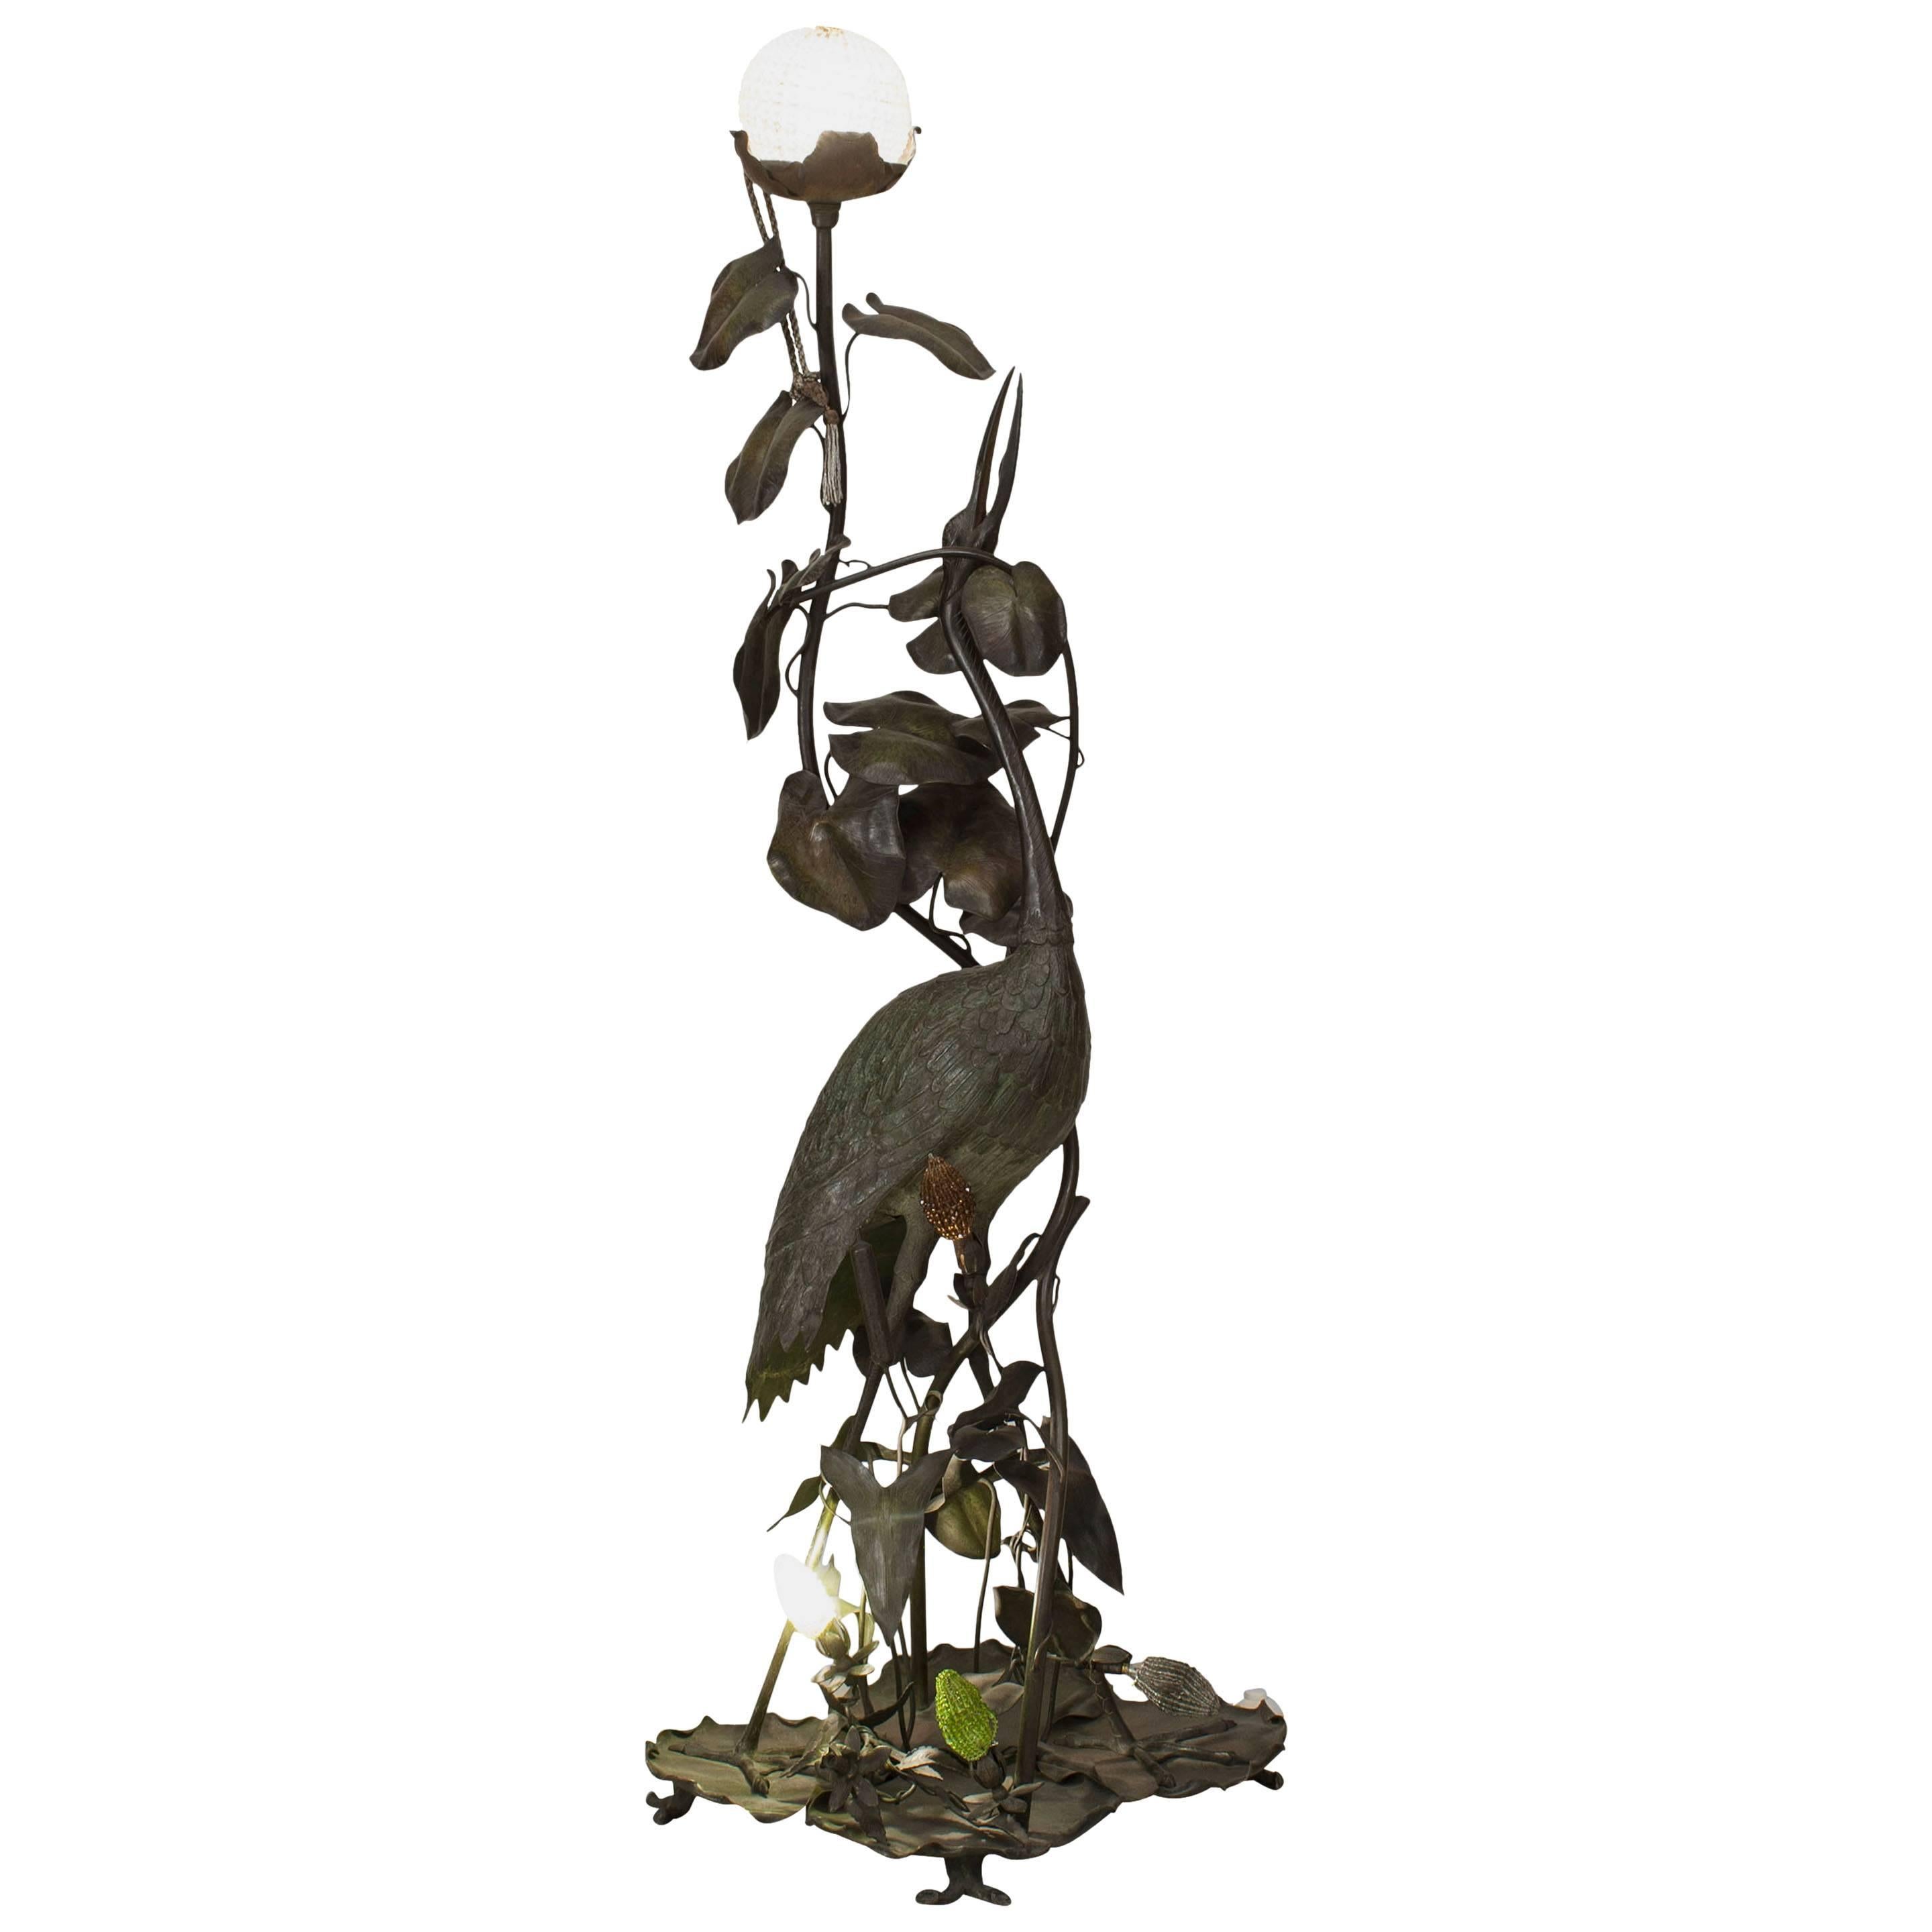 French Art Nouveau Cast Metal Floor Lamp Depicting a Heron with Lily Pads